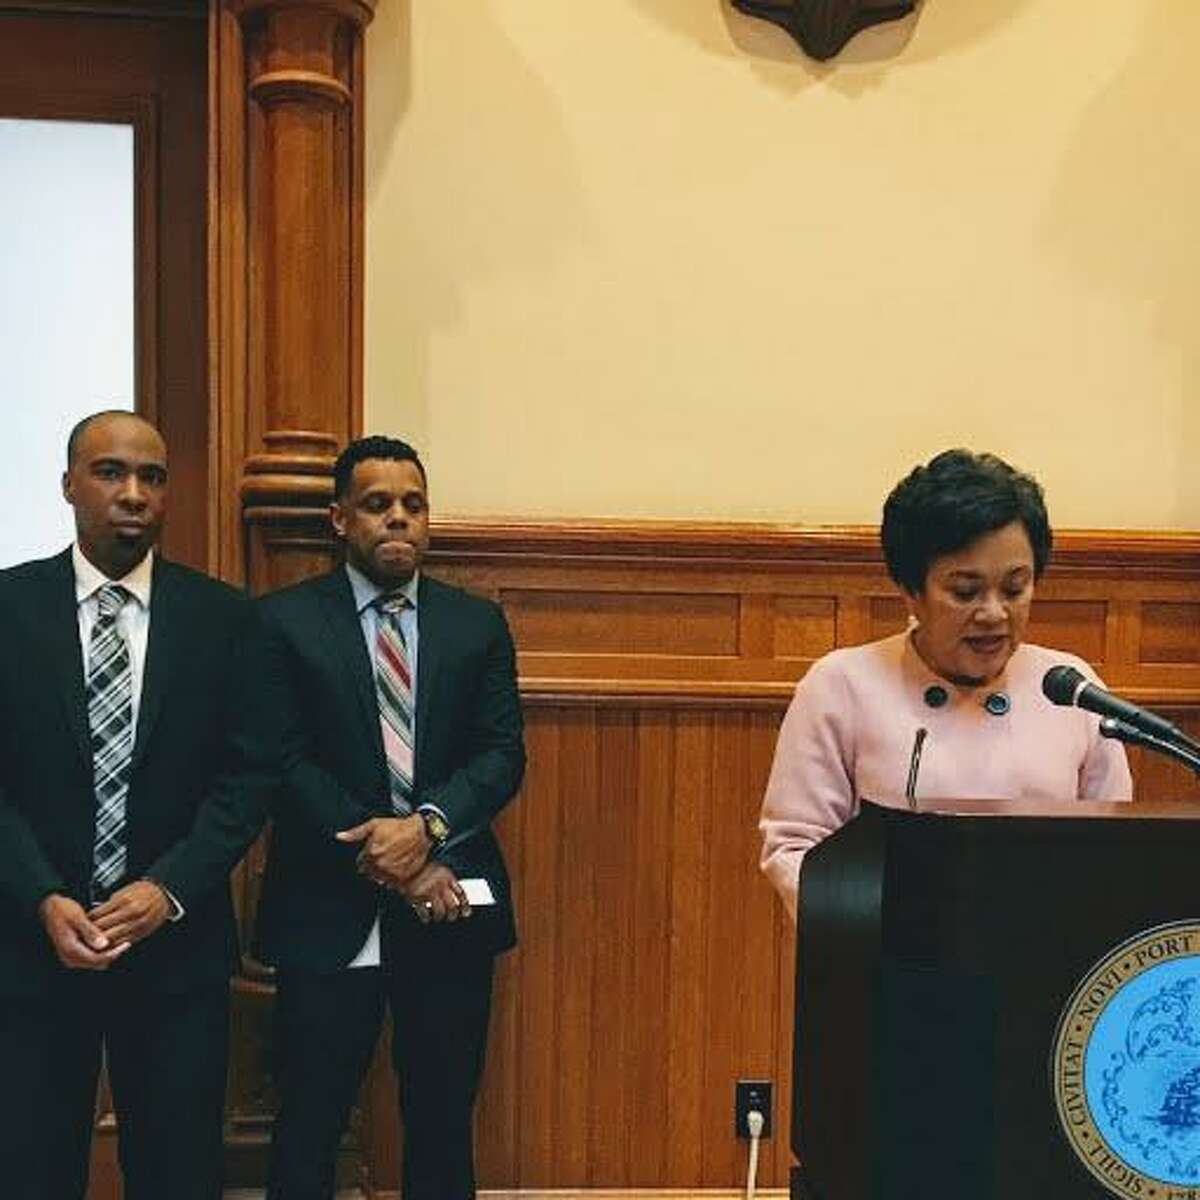 New Haven Mayor Toni N. Harp delivers her budget message at a press conference at City Hall. Behind her from left is Police Chief Anthony Campbell, Acting Budget Director Michael Gormany, Controller Daryl Jones and Economic Development Administrator Matthew Nemerson